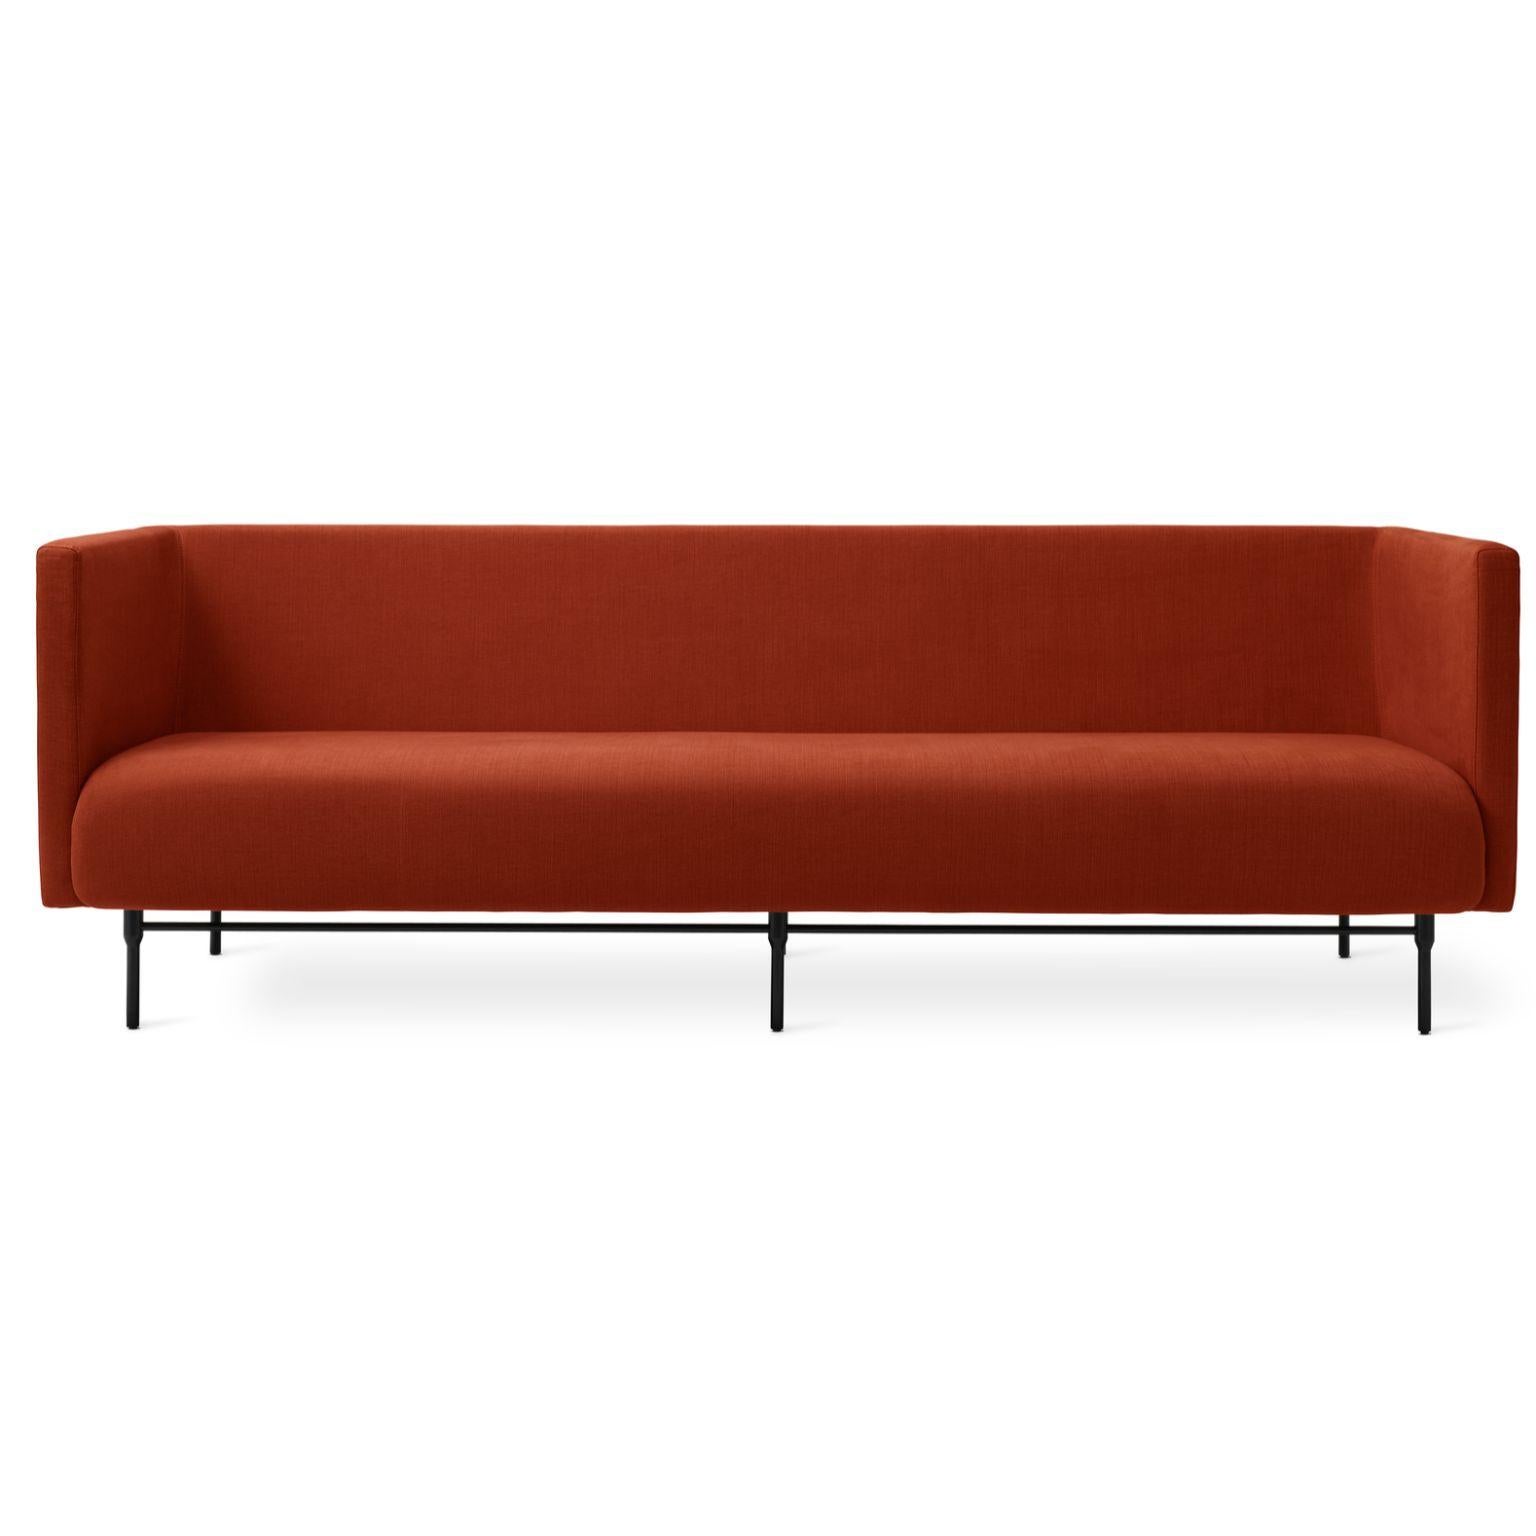 Galore 3 seater maple red by Warm Nordic
Dimensions: D222 x W83 x H 76 cm
Material: Textile upholstery, Powder coated black steel legs, Wooden frame, foam, spring system.
Weight: 62 kg
Also available in different colours and finishes. 

Warm